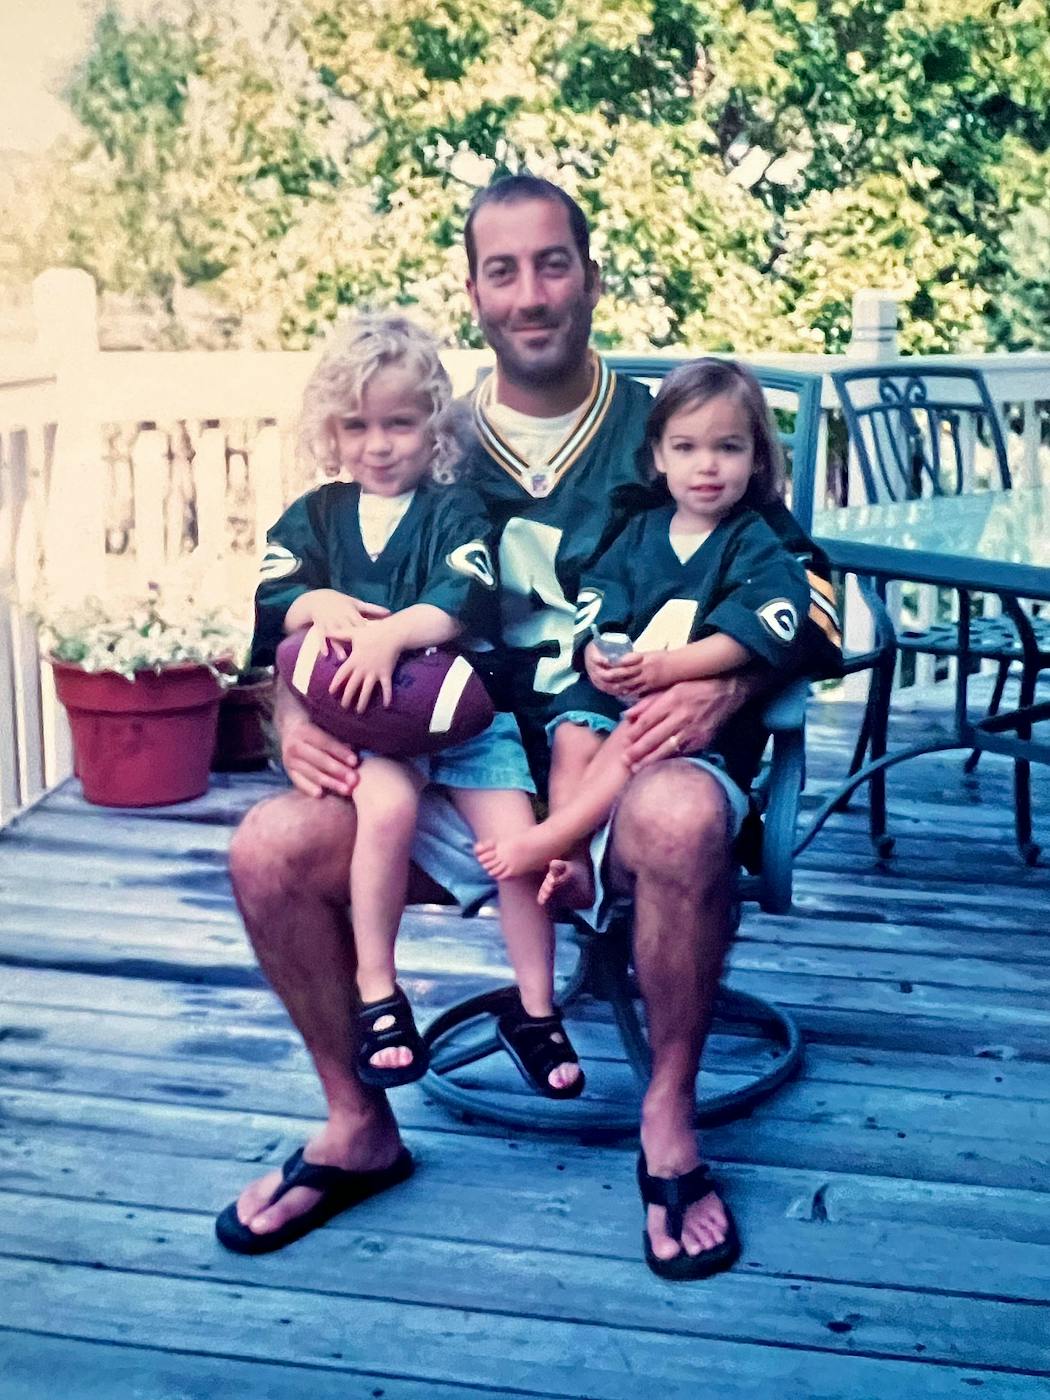 Paul Russo dressed his daughters, Olivia and Alexa, in matching Brett Favre jerseys when they were young.